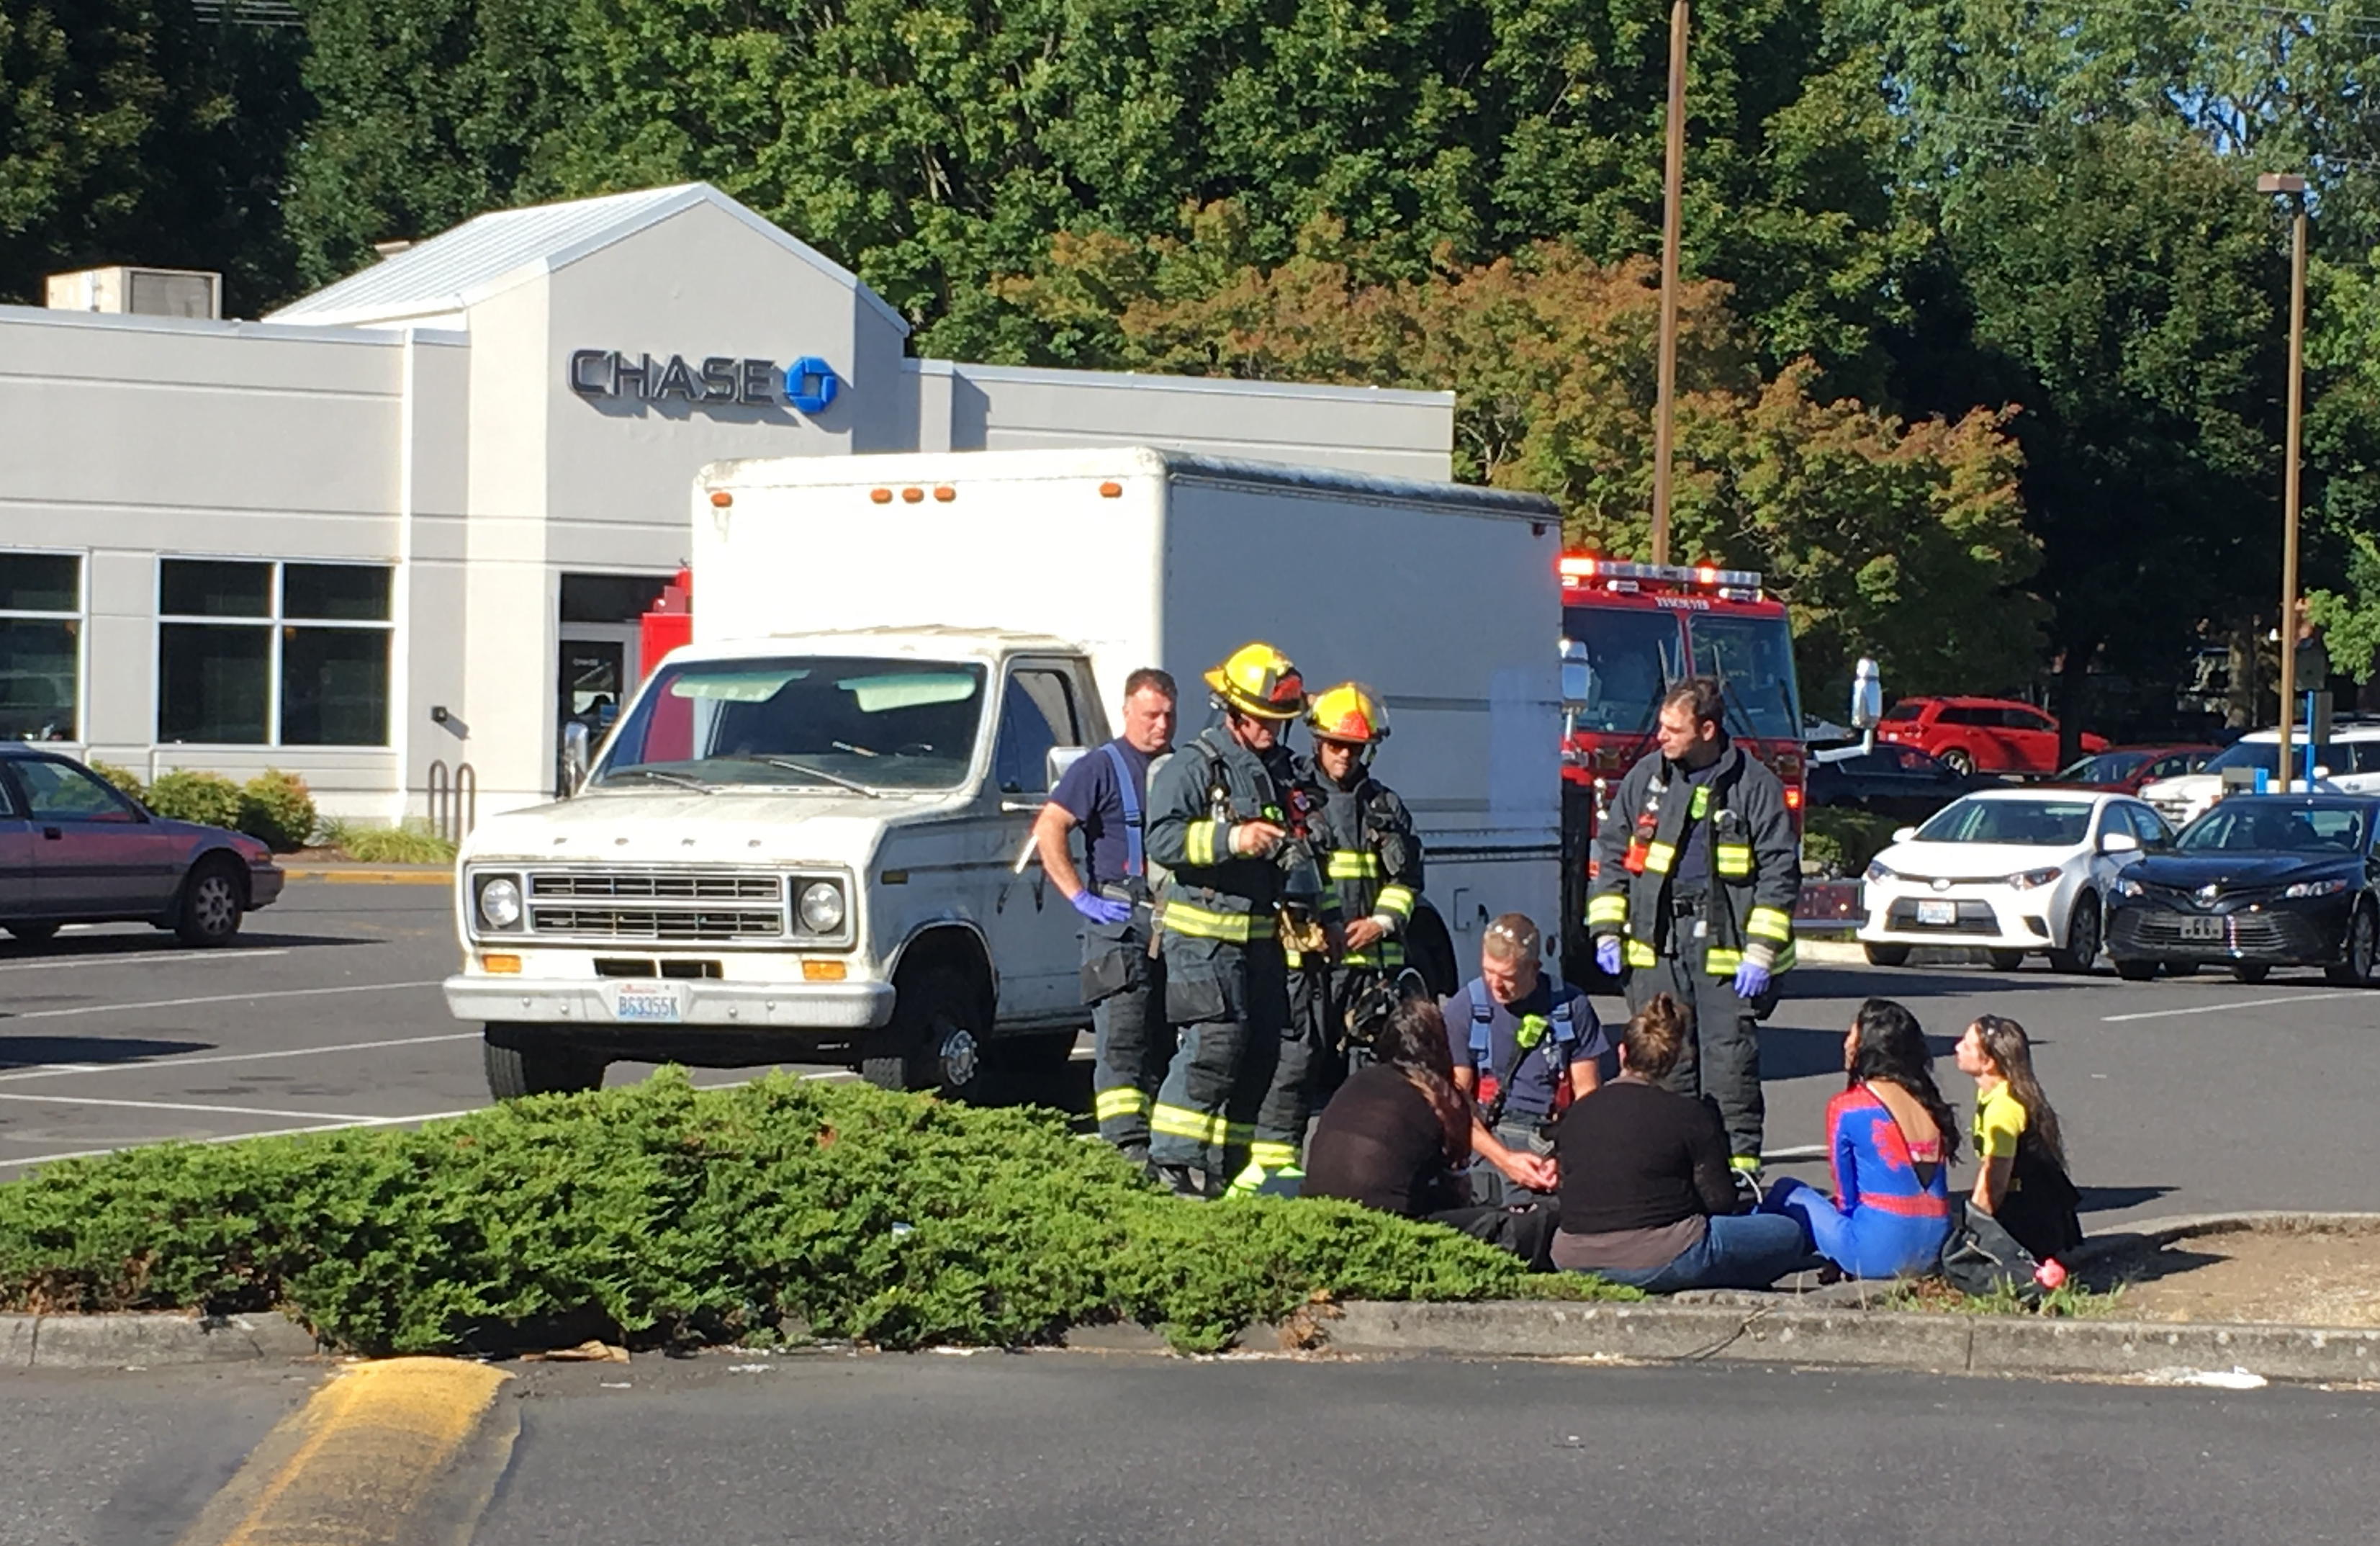 Four people were evaluated for carbon monoxide exposure Monday afternoon at Columbia Square shopping mall.